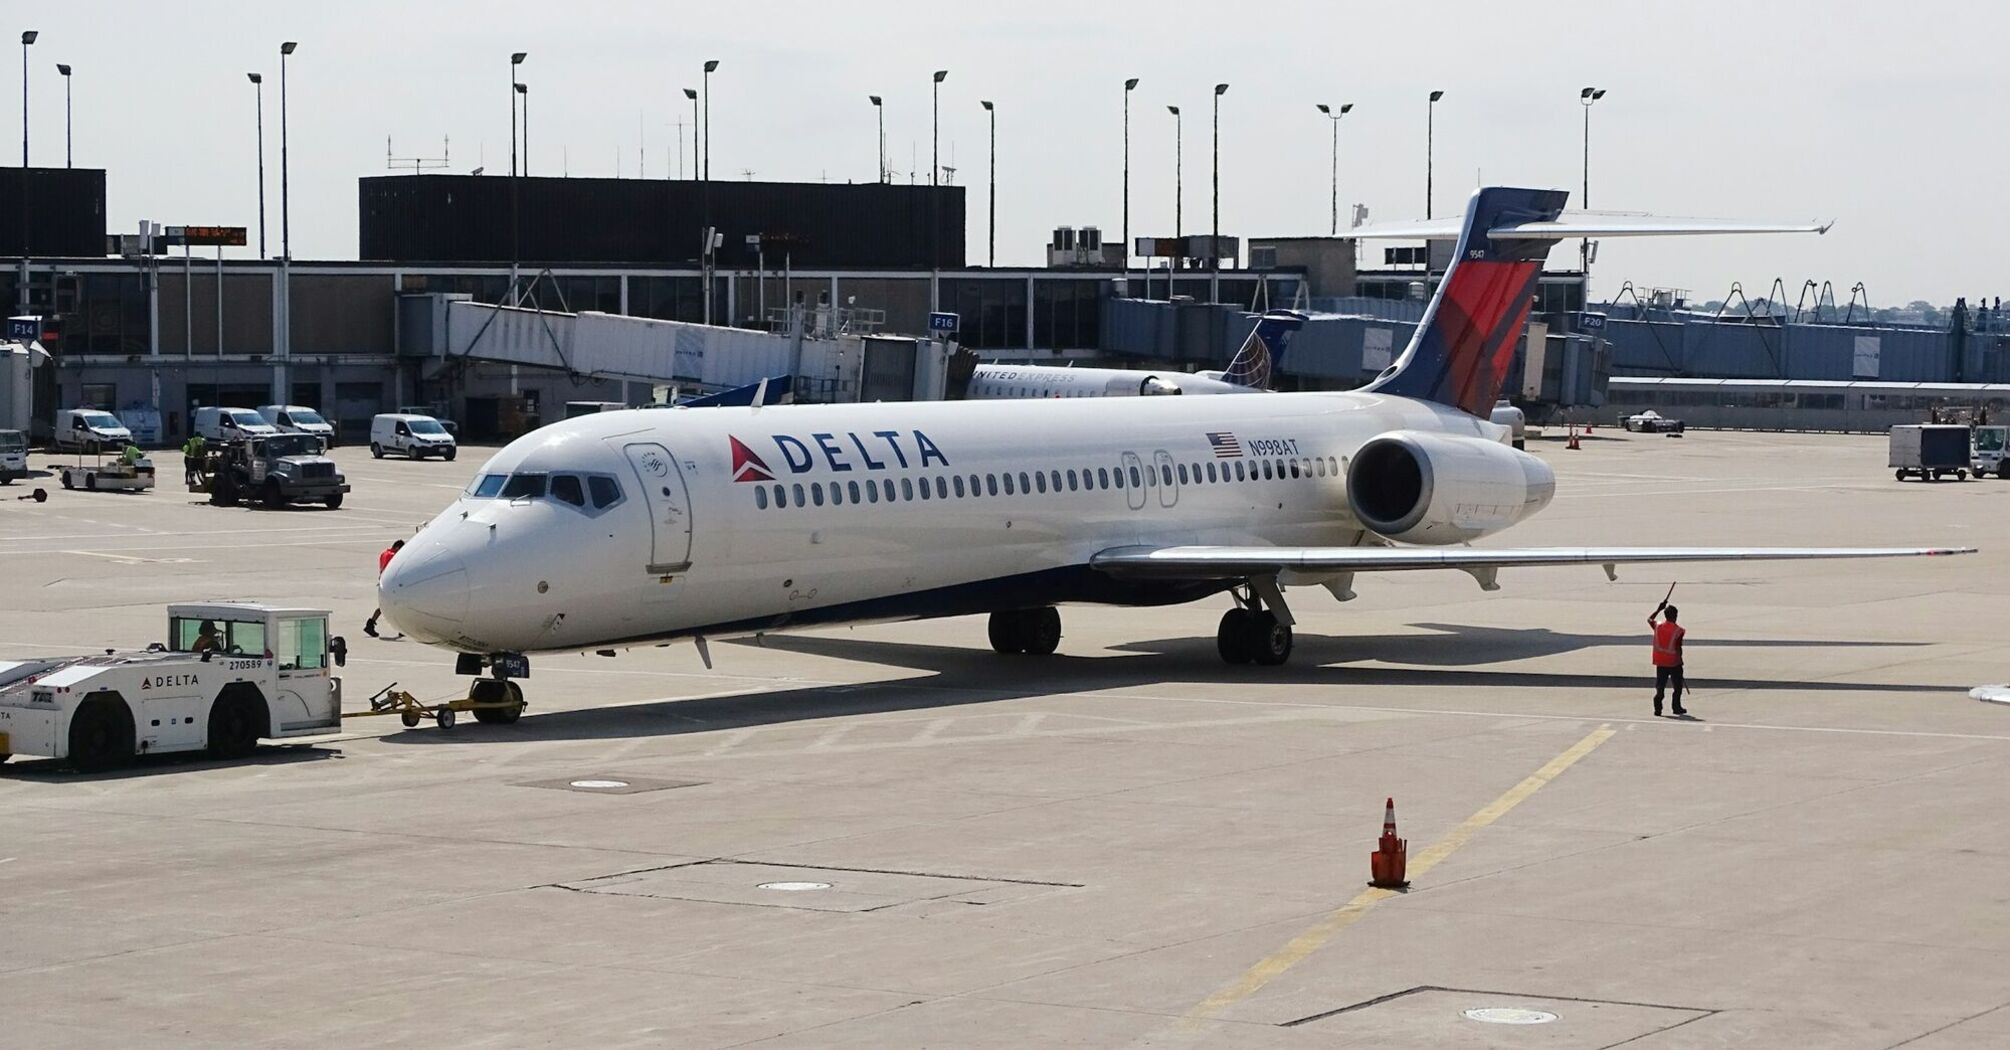 Delta Air Lines plane at the airport